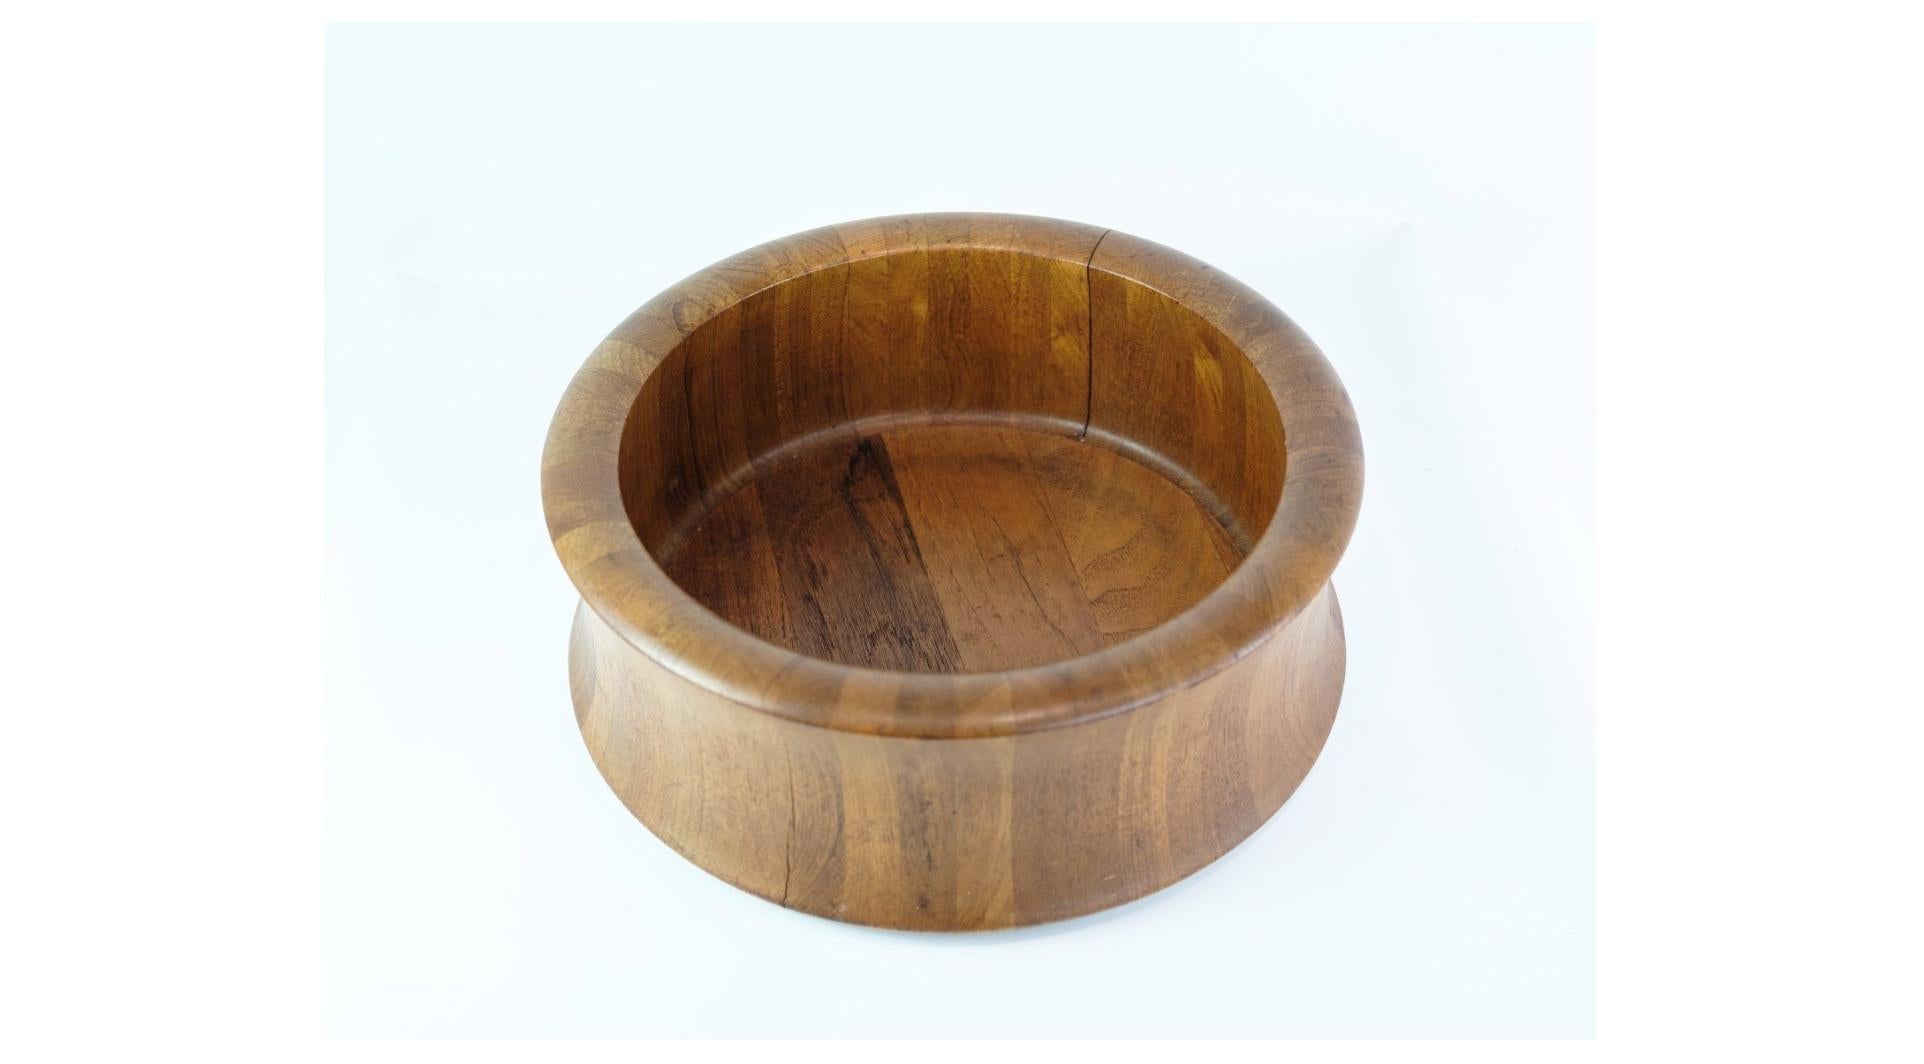 Crafted around the 1960s, this Danish-designed teak wood bowl bears the stamp of Digsmed, embodying the epitome of mid-century Danish craftsmanship and style.

Fashioned from high-quality teak wood, this bowl boasts a rich, warm hue and distinctive